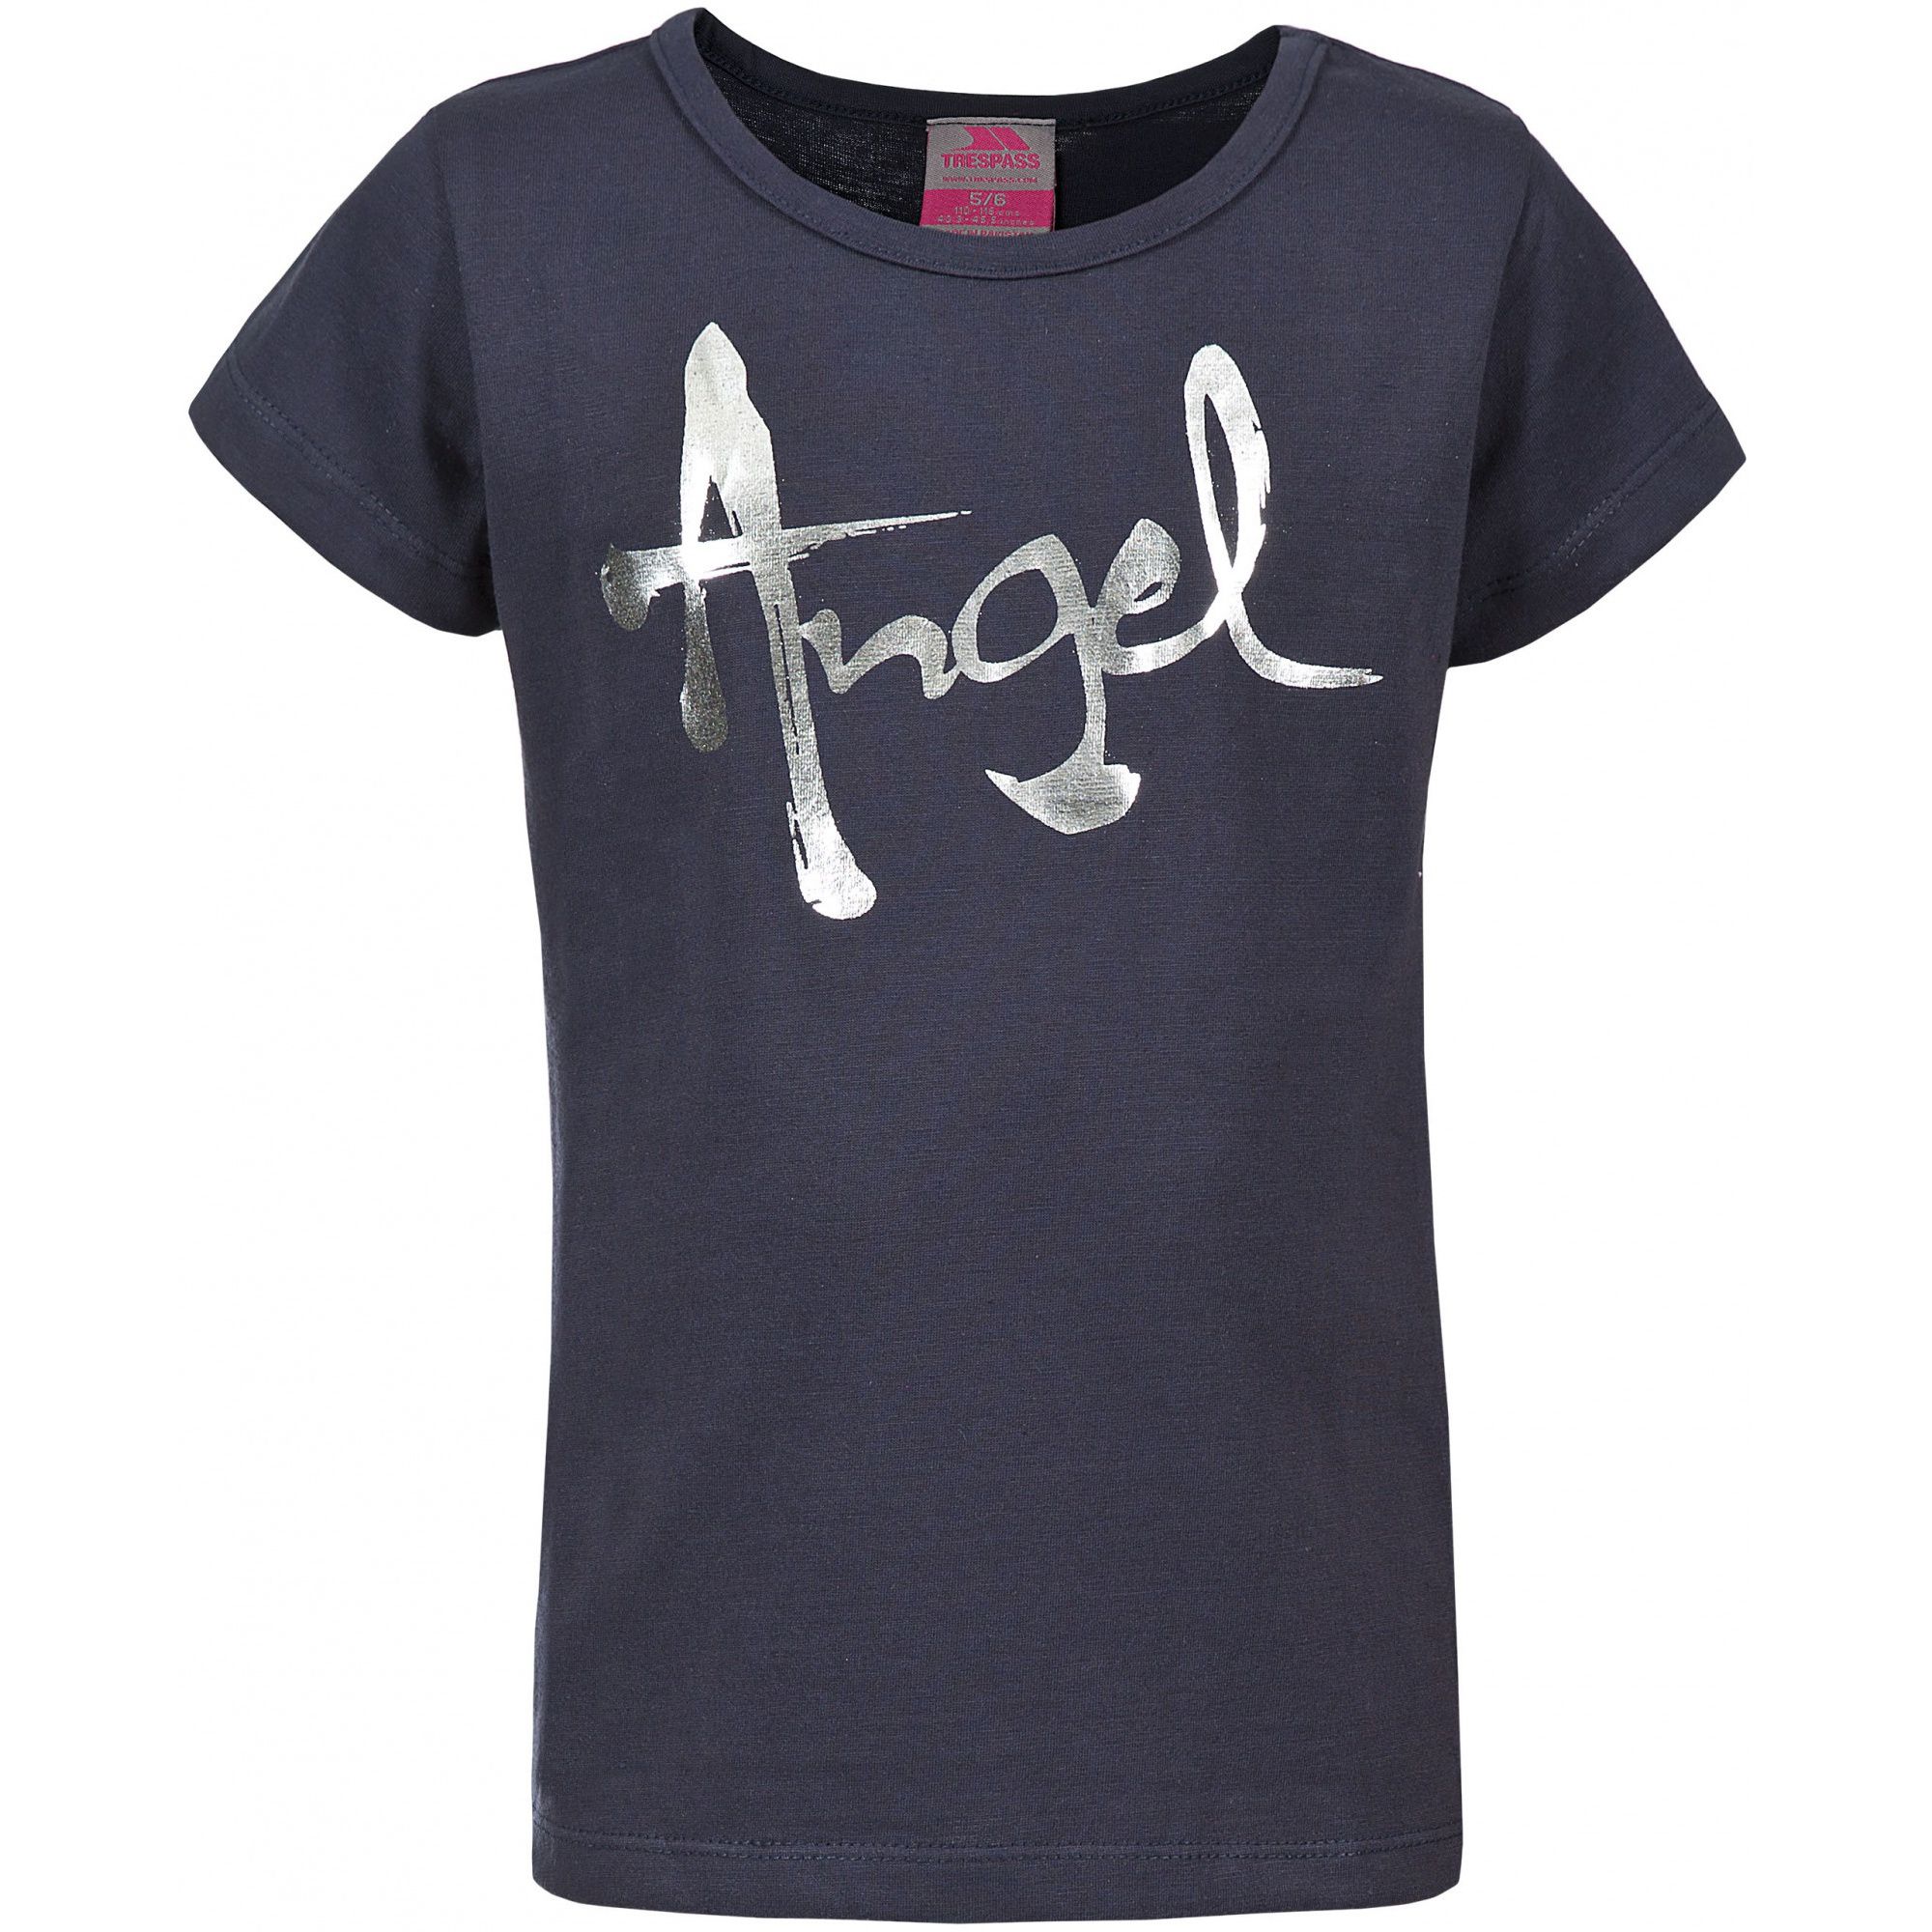 Round Neck T-Shirt. Print on the Front. 65% Polyester, 35% Cotton. Trespass Childrens Chest Sizing (approx): 2/3 Years - 21in/53cm, 3/4 Years - 22in/56cm, 5/6 Years - 24in/61cm, 7/8 Years - 26in/66cm, 9/10 Years - 28in/71cm, 11/12 Years - 31in/79cm.